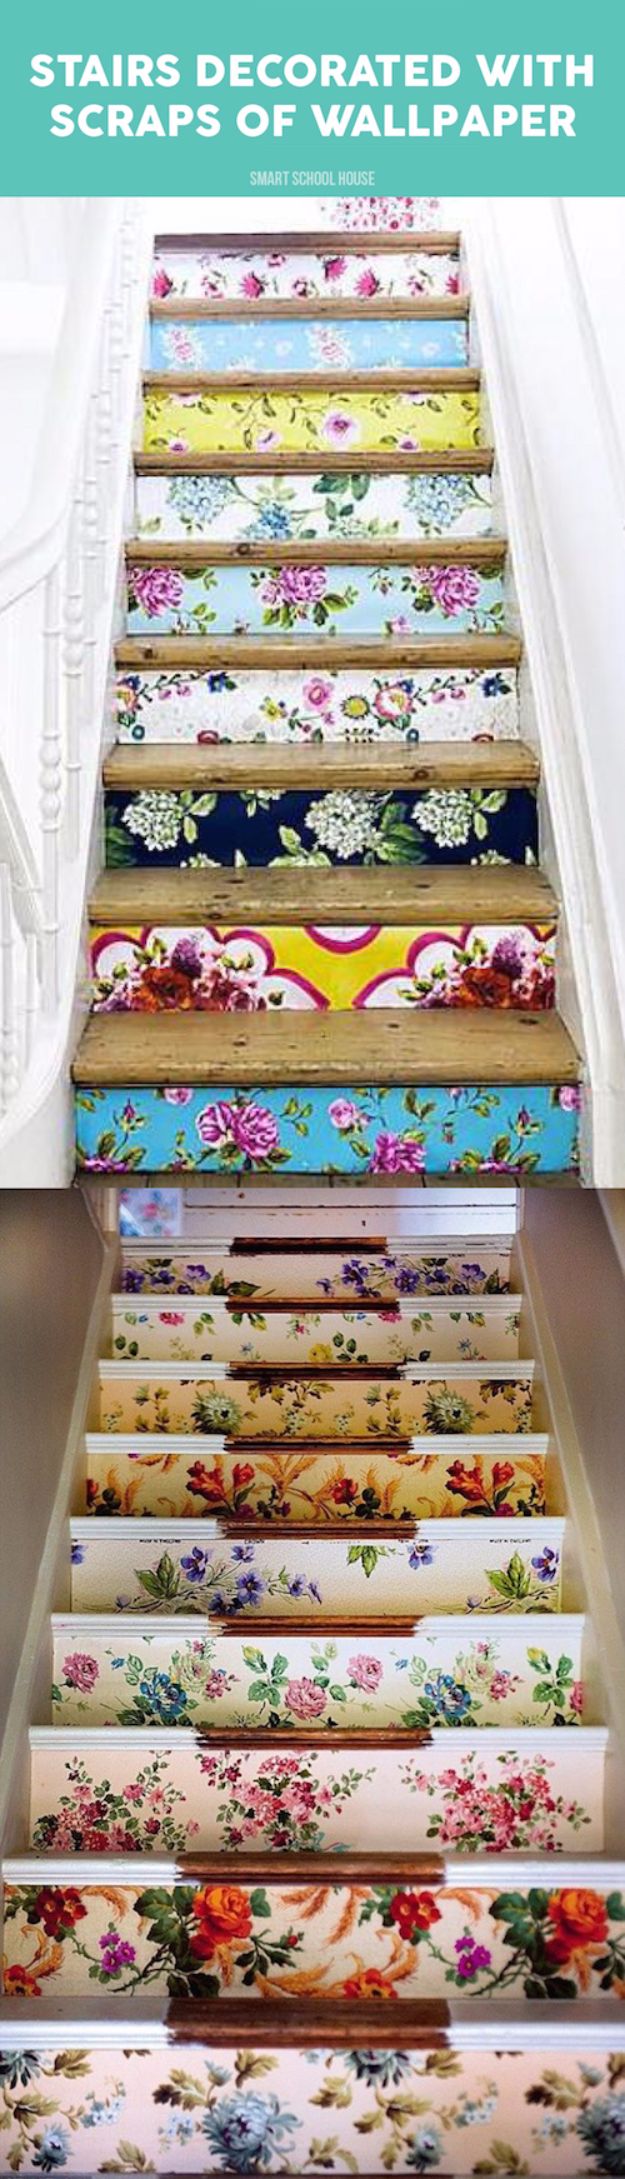 DIY Ideas for Wallpaper Scraps - Stairs Decorated With Scraps Of Wallpaper - Cute Projects and Easy DIY Gift Ideas to Make With Leftover Wall Paper - Fun Home Decor, Homemade Wall Art Idea Tutorials, Creative Ways to Use Old Wallpapers - Cool Crafts for Men, Women and Teens http://diyjoy.com/diy-ideas-wallpaper-scraps